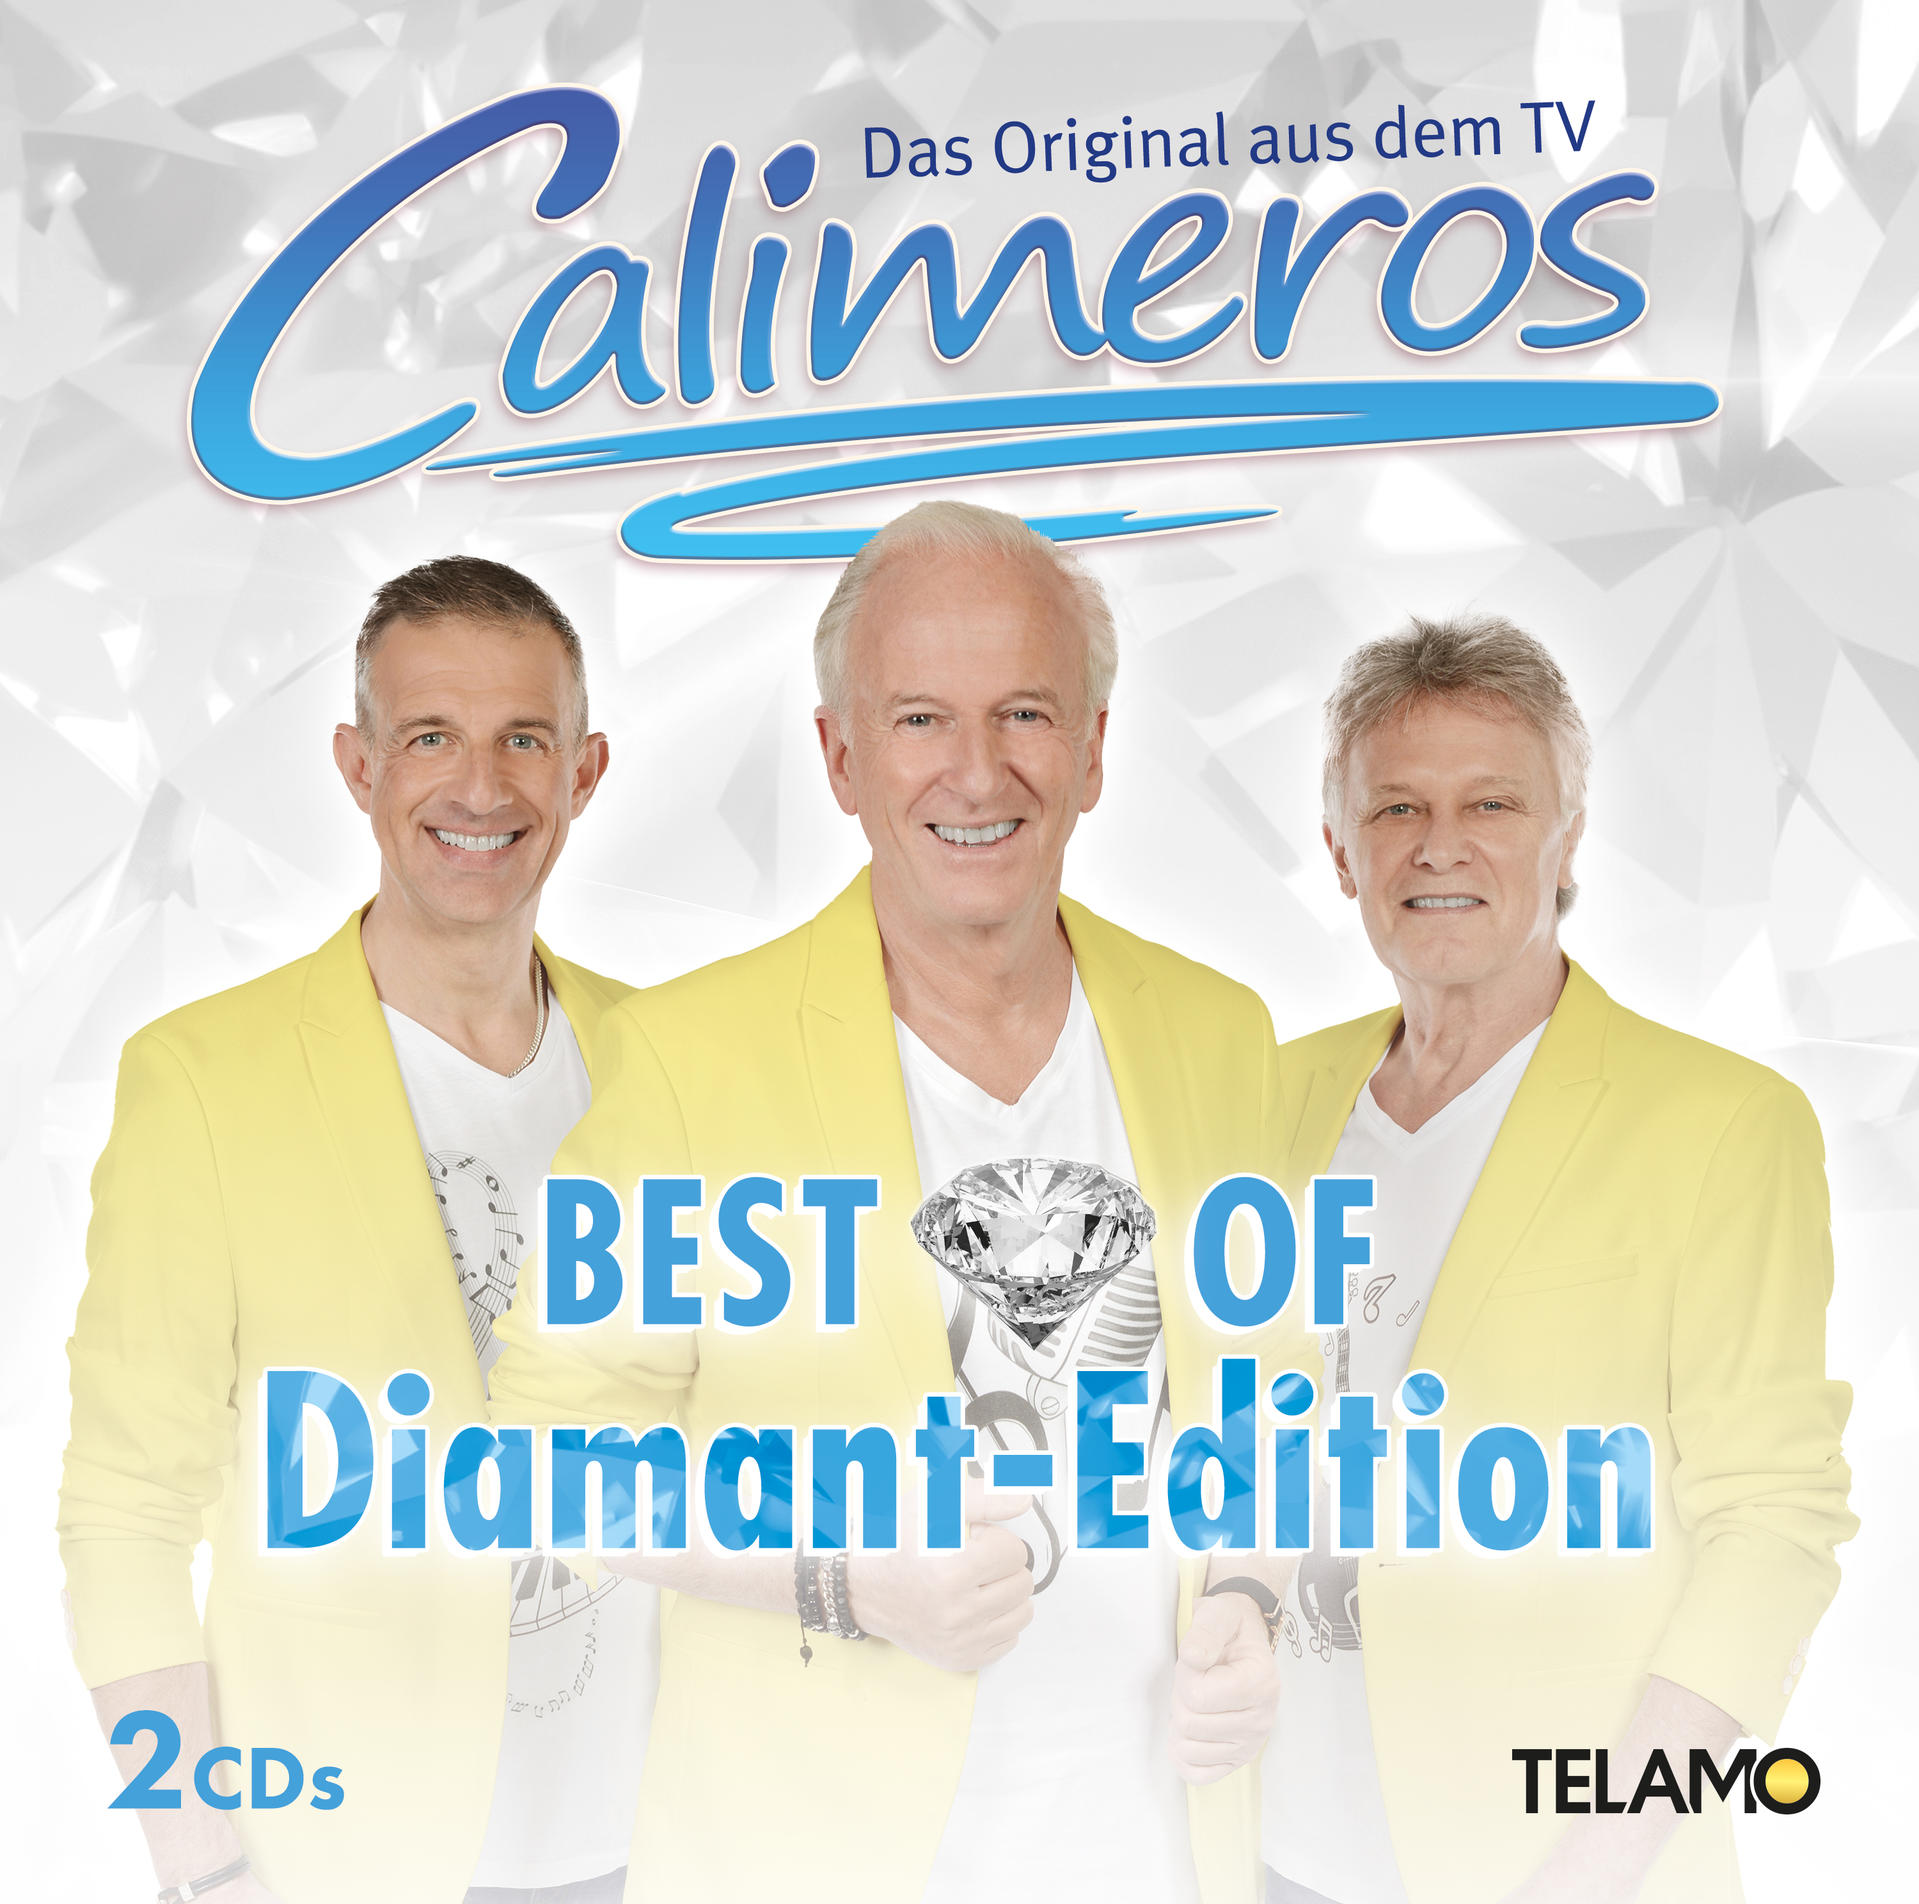 Calimeros - - Of(Diamant-Edition) Best (CD)